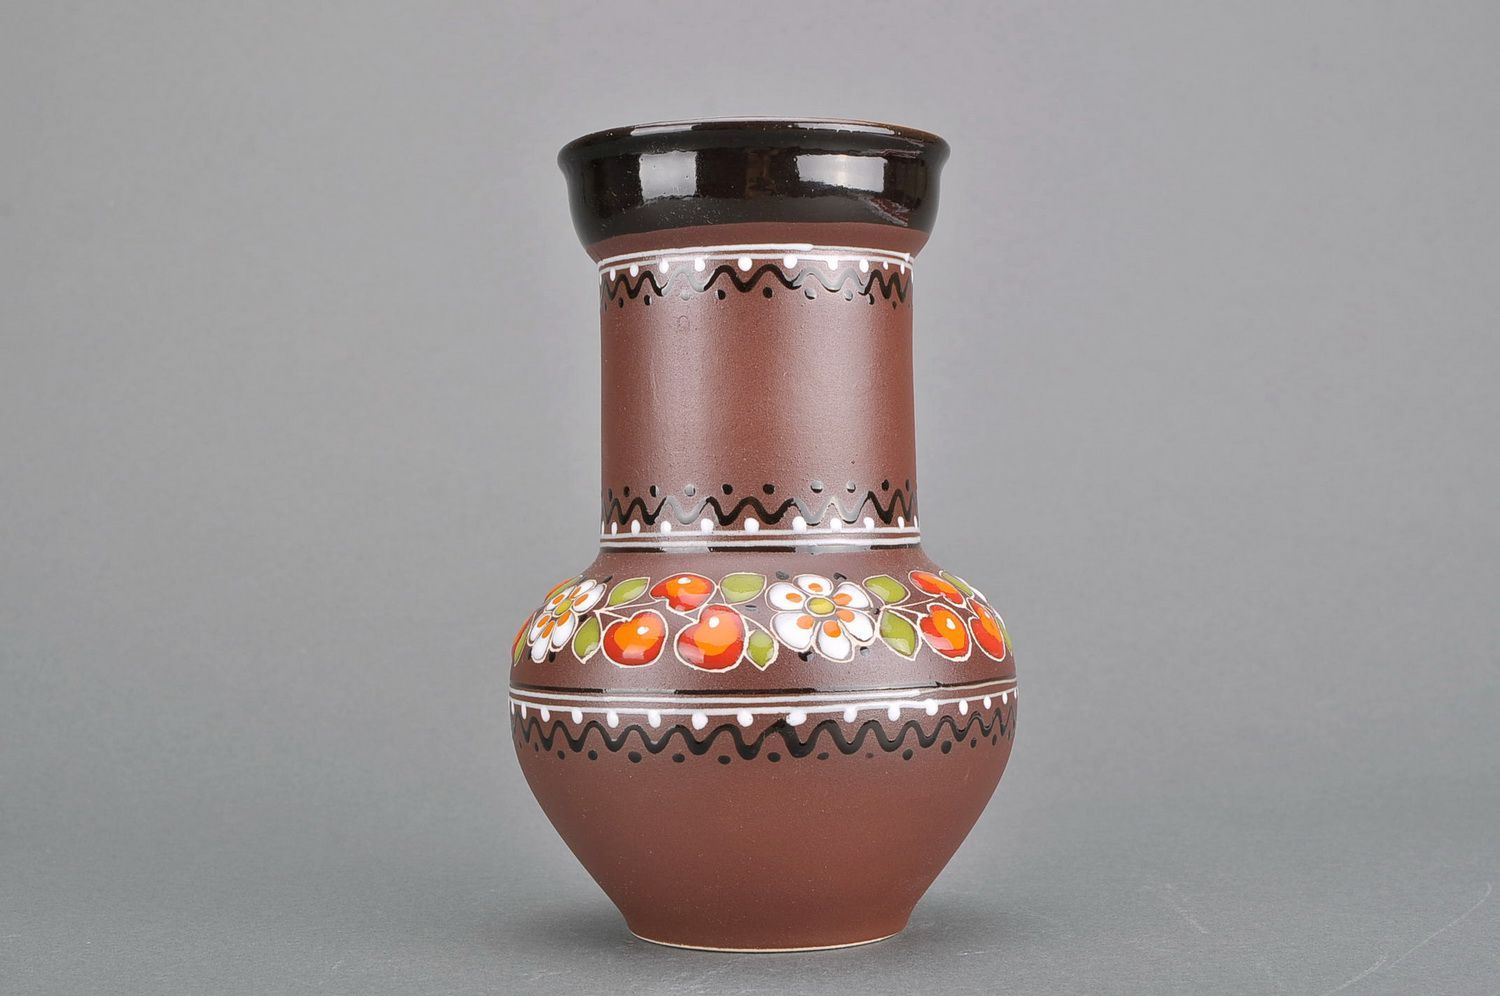 60 oz ceramic milk pitcher jug in brown color with ethnic decoration painting 1,2 lb photo 2